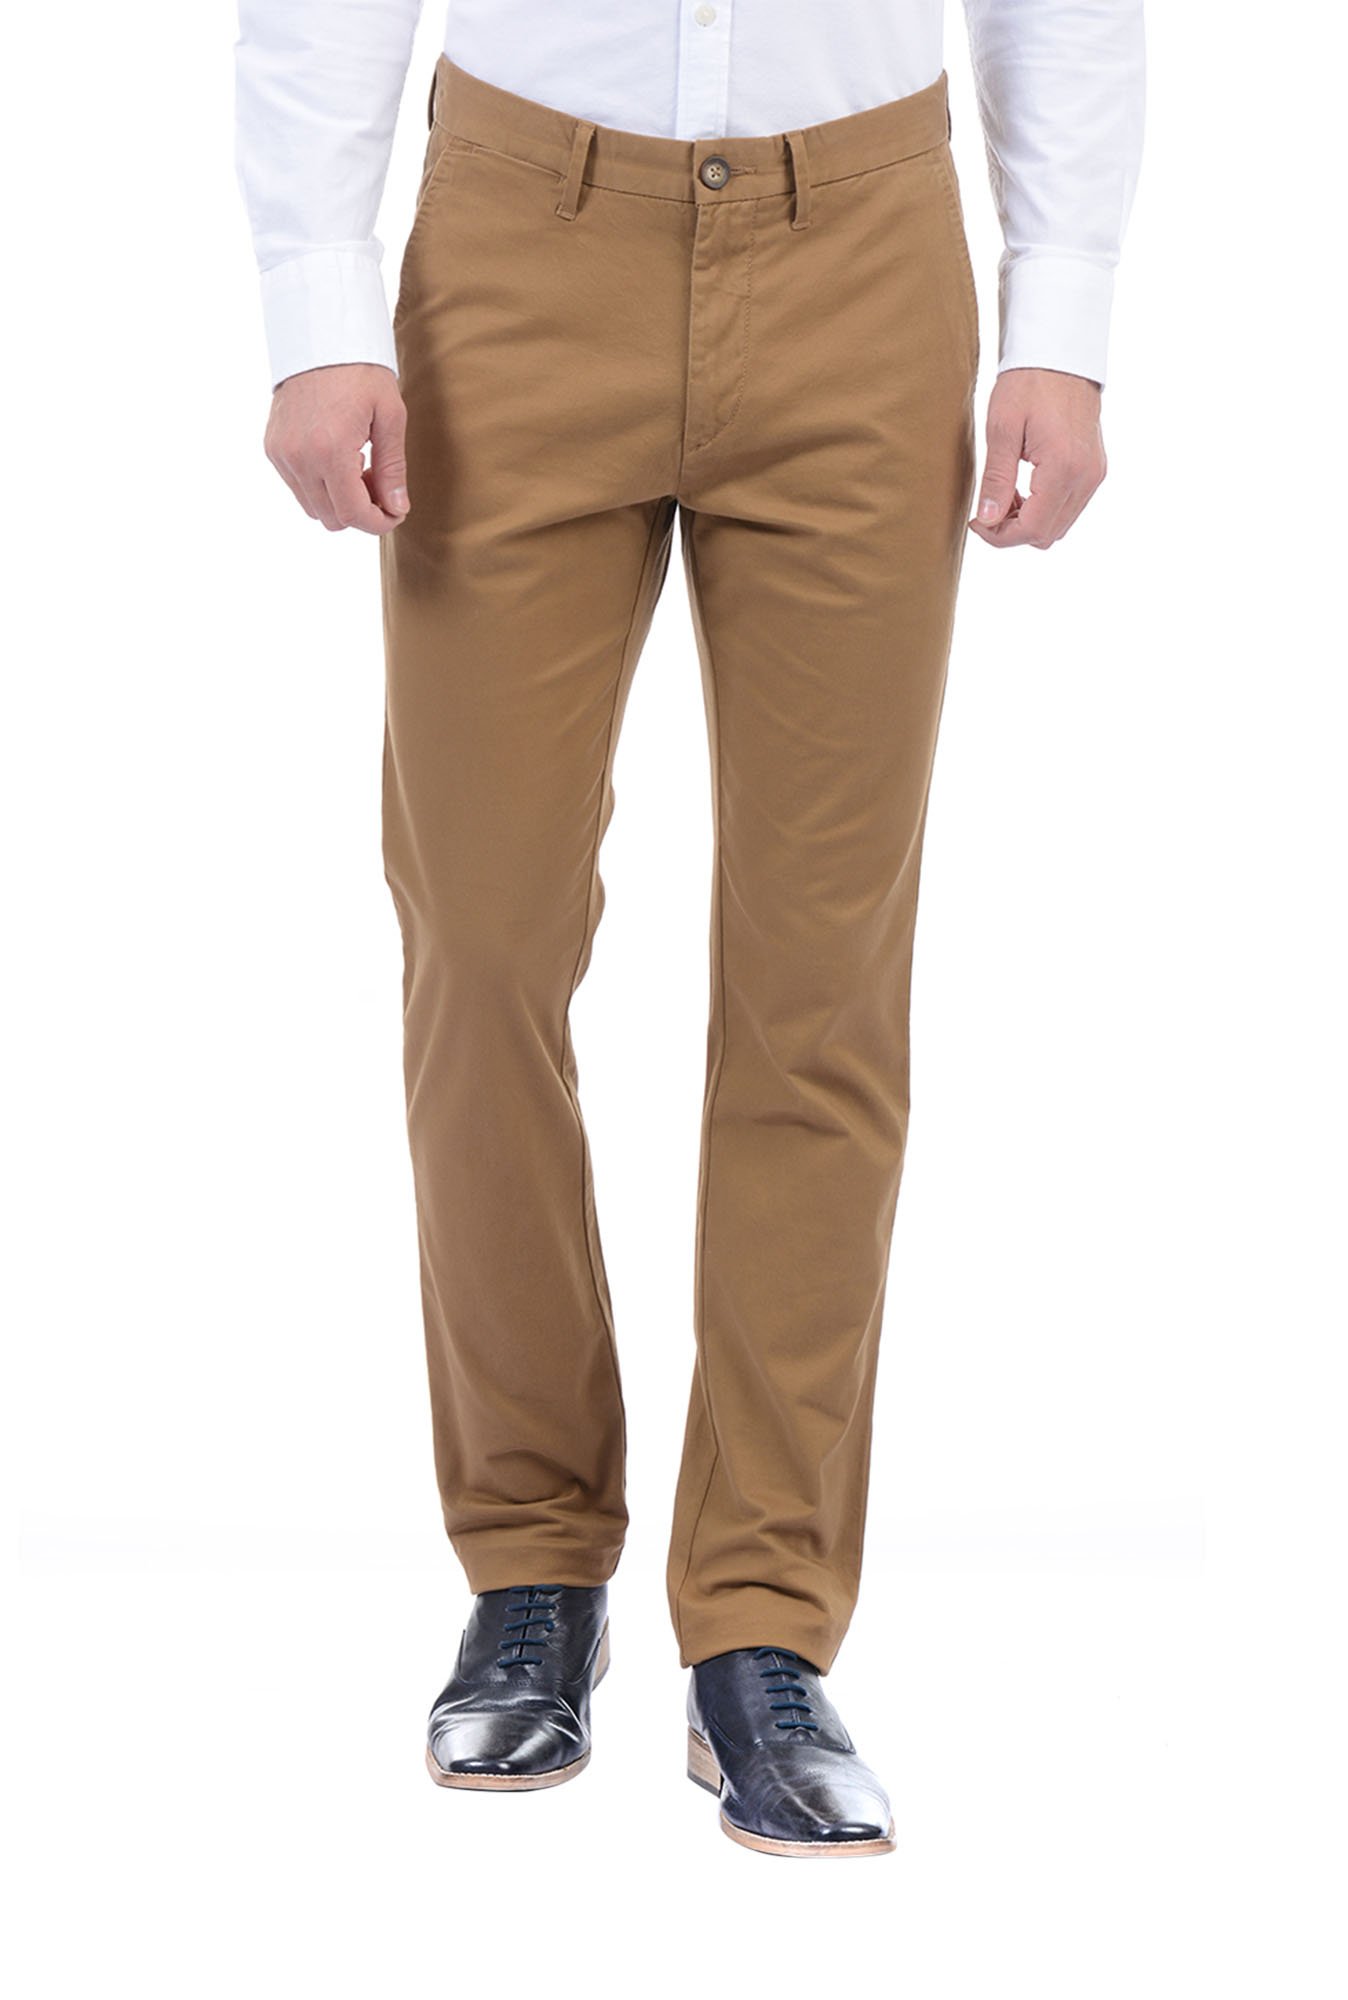 Slim Fit Cotton twill trousers - Light grey - Men | H&M IN